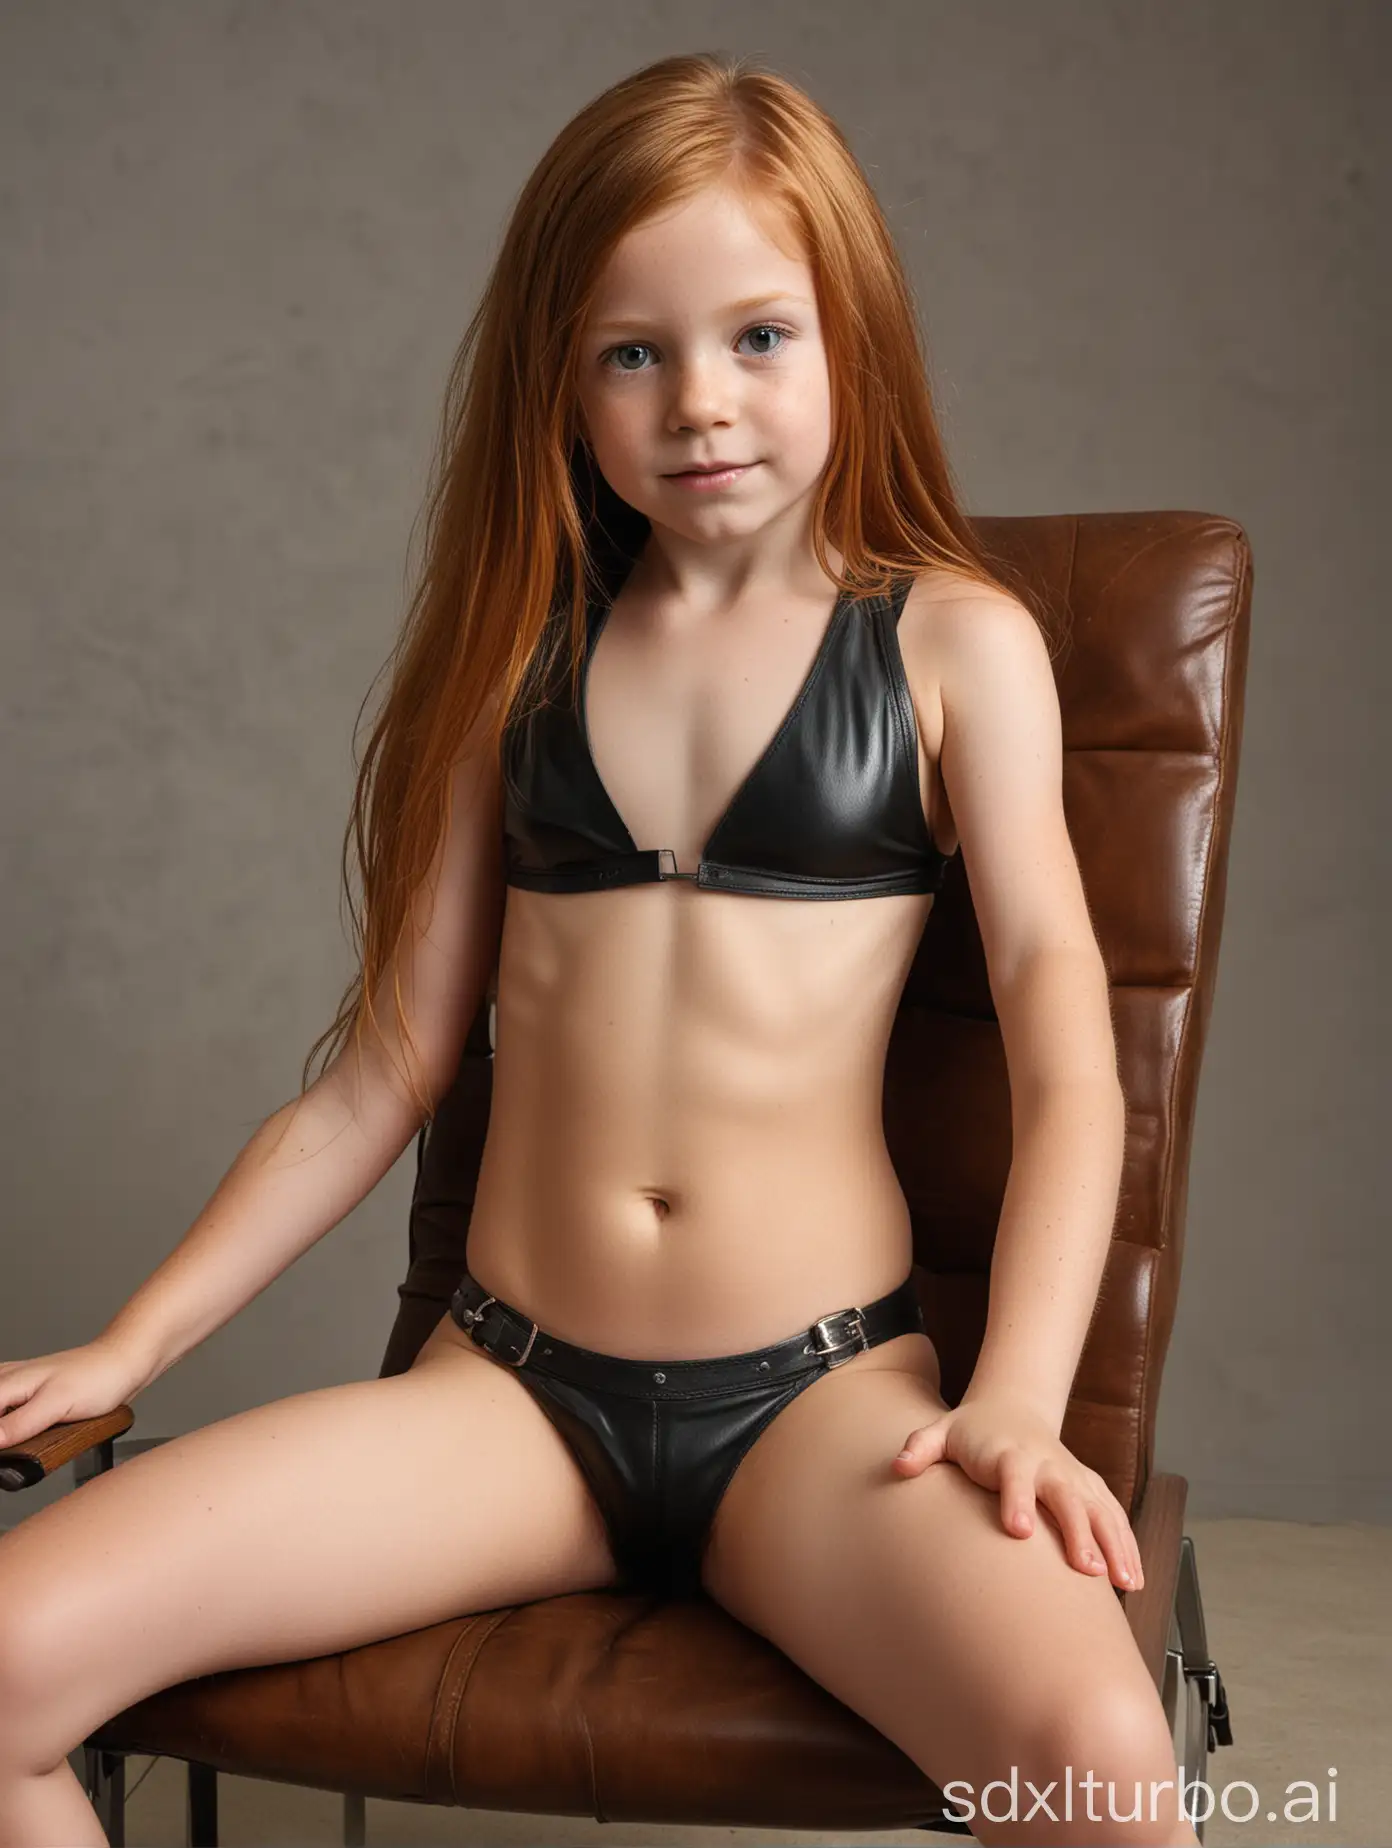 7 years old girl, long ginger hair, flat chested, extra muscular abs, show belly, topless leather bikini, seated to a chair